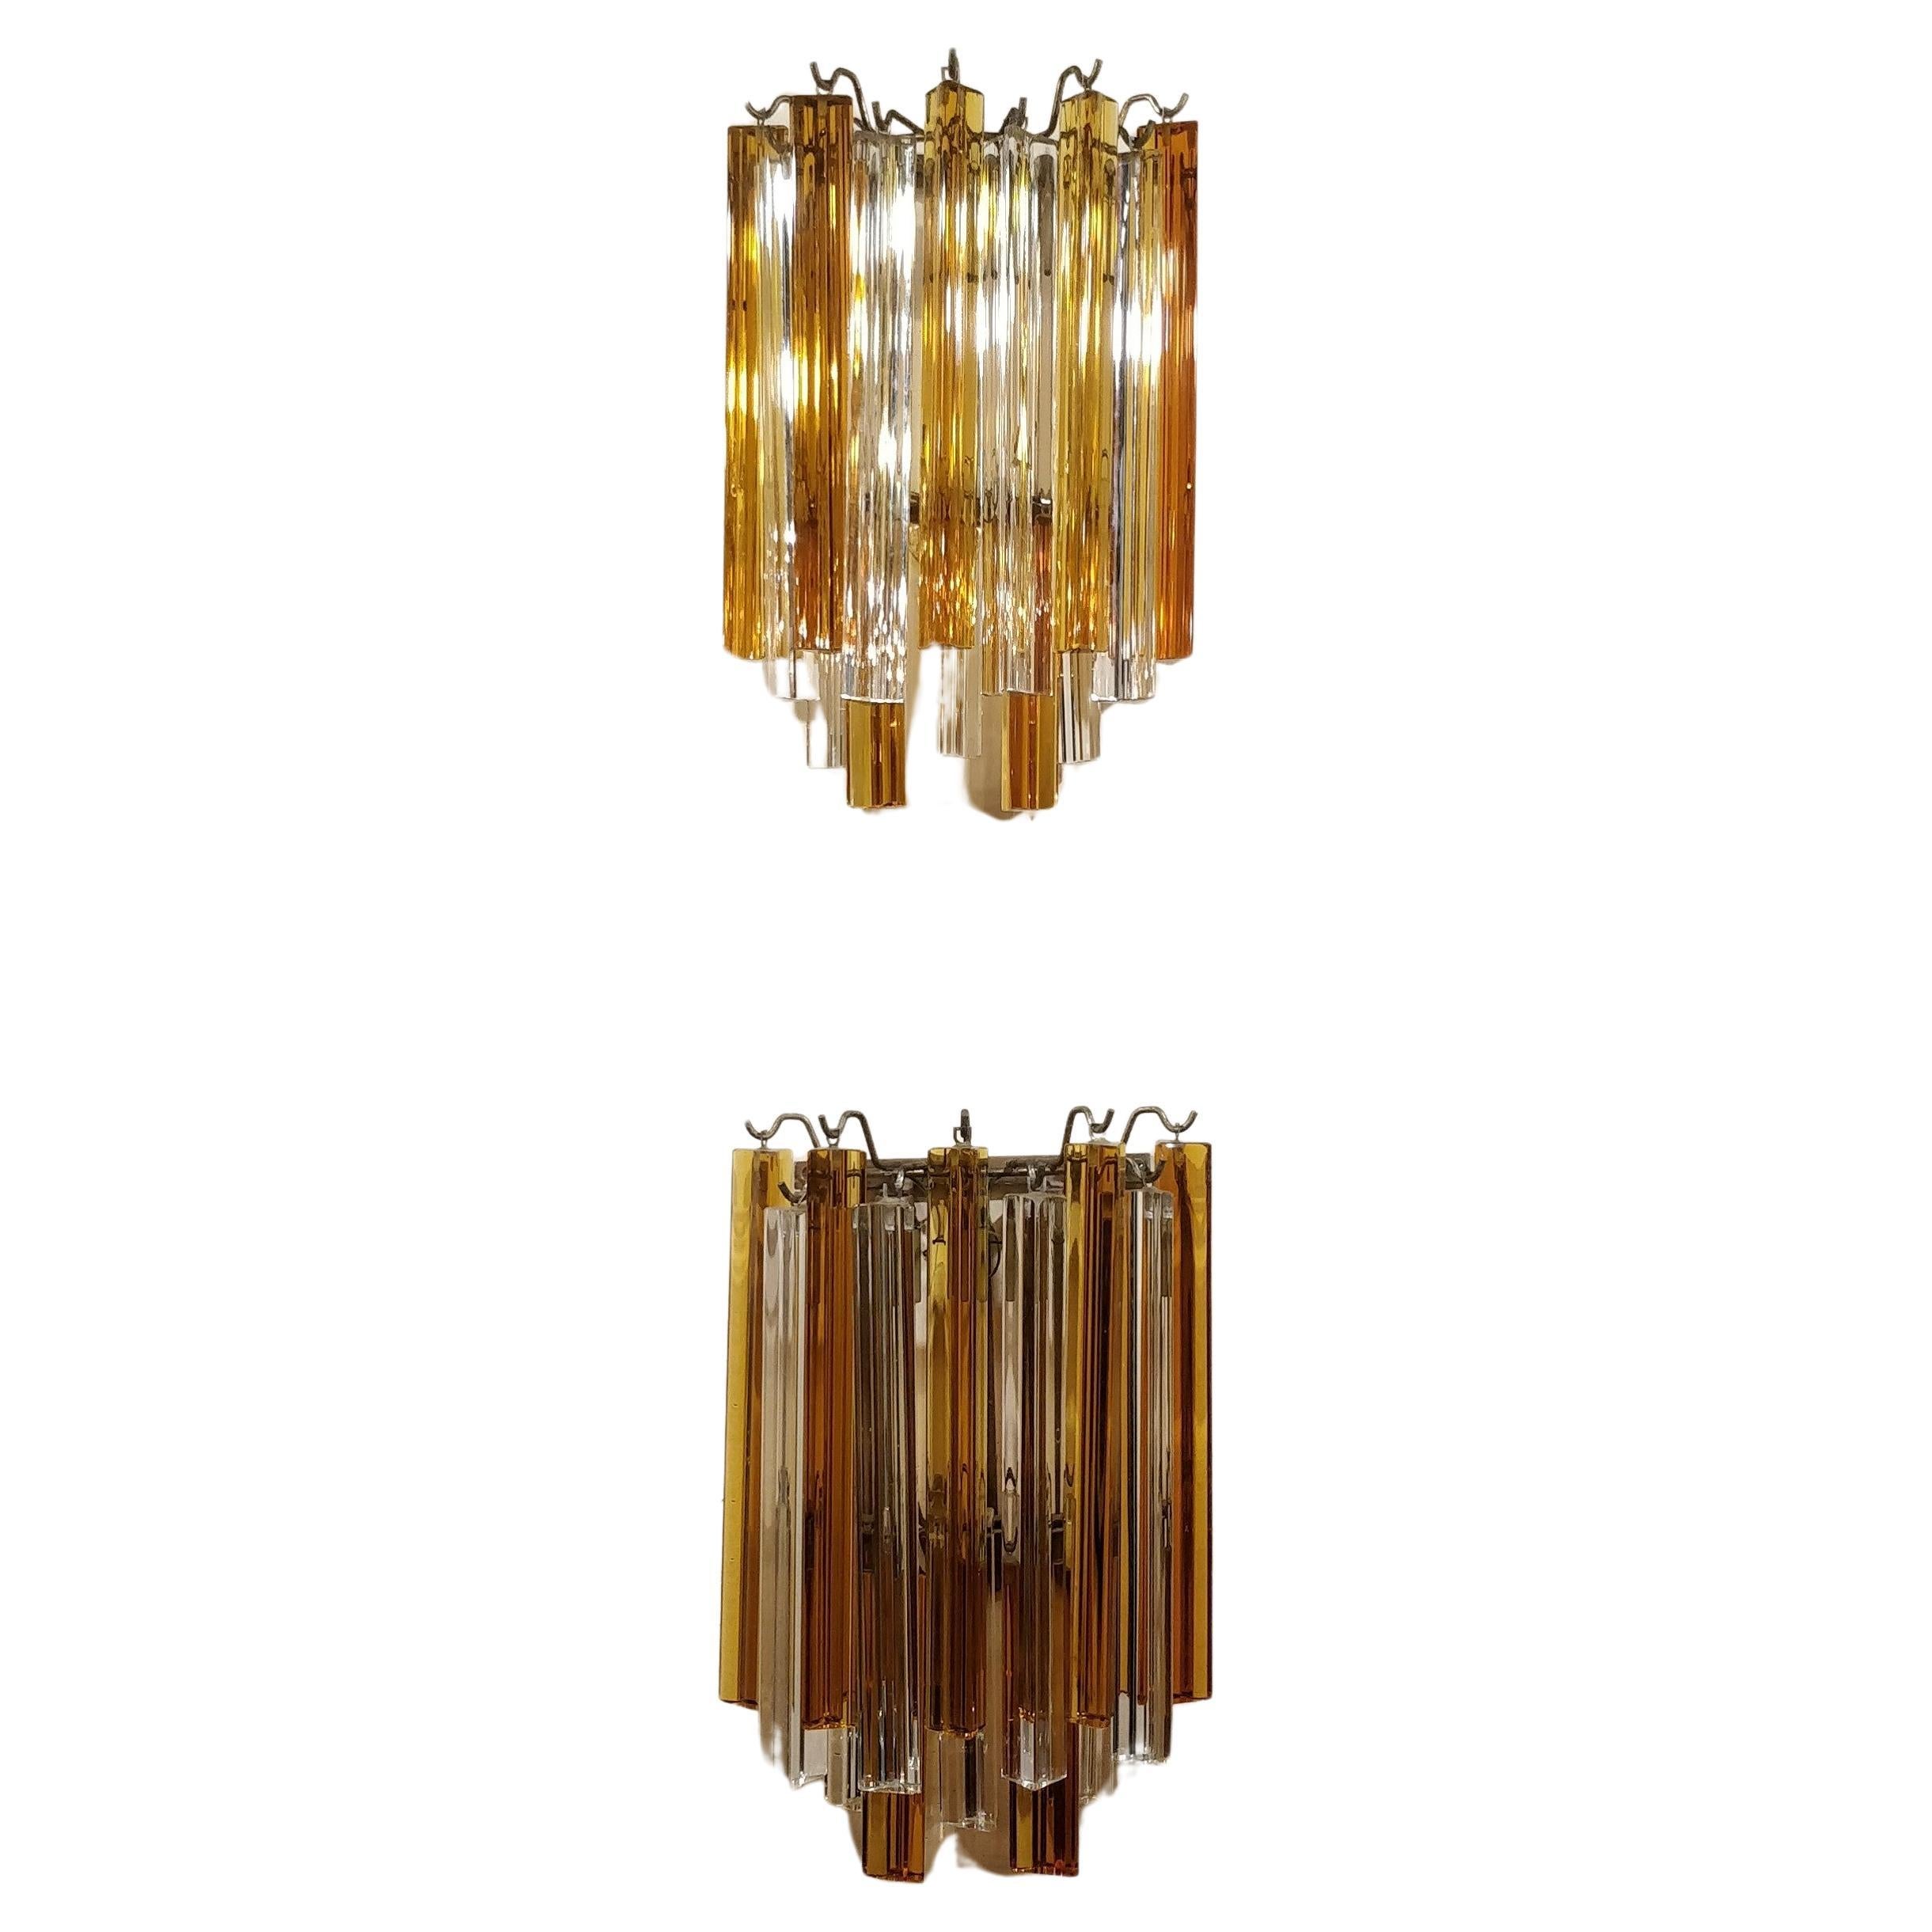 Pair of vintage Venini wall sconces Murano glass 1970s orange and white